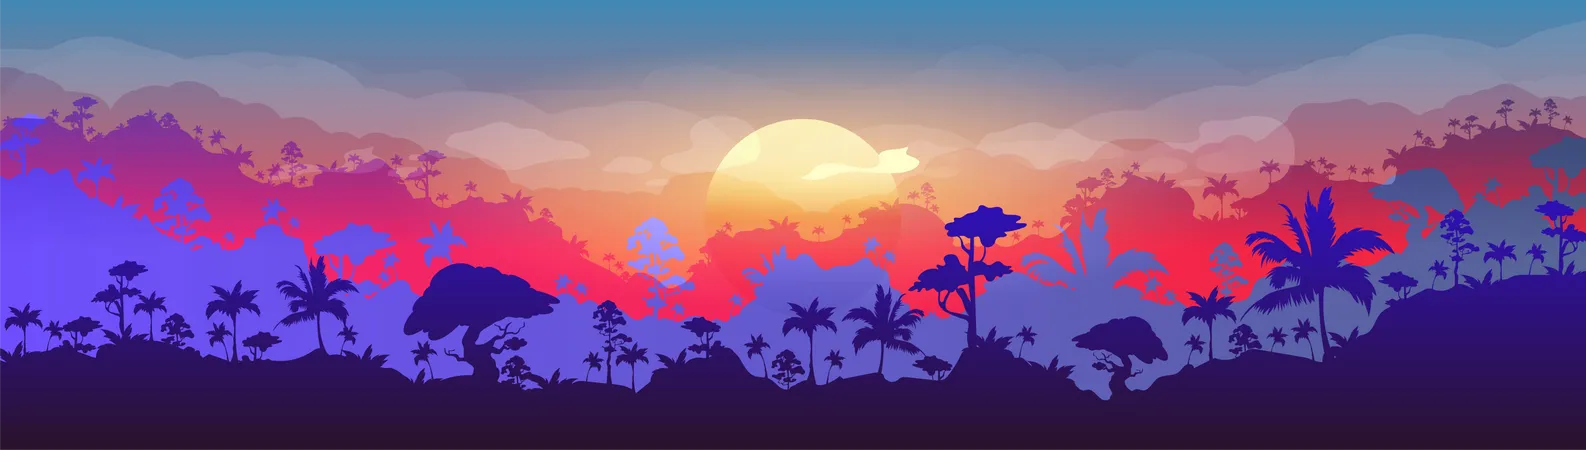 Evening forest scenery  Illustration